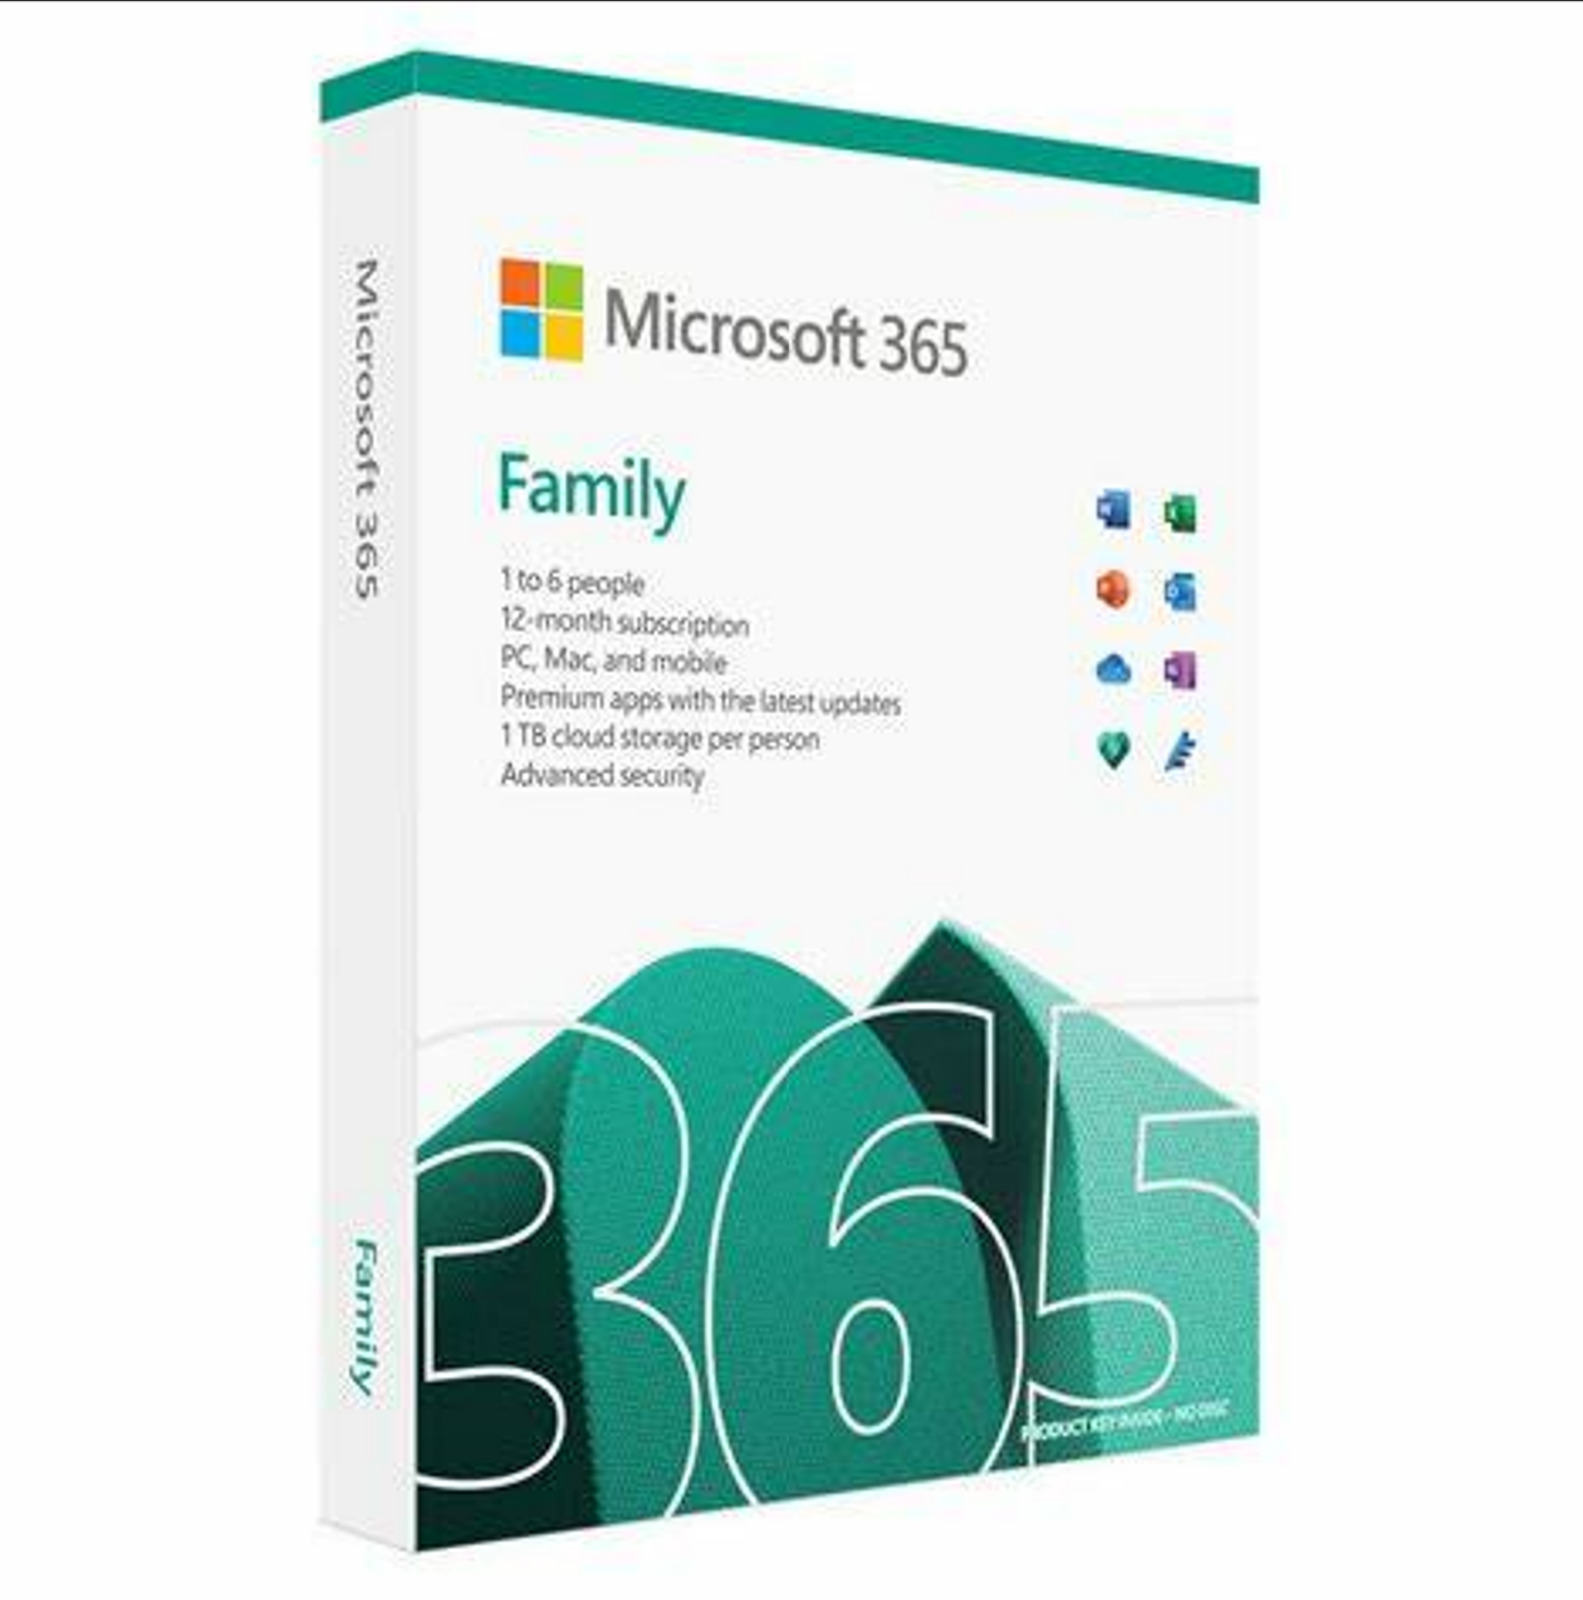 Microsoft 365 Family, 12-Month Subscription, 6 Users shipped USPS